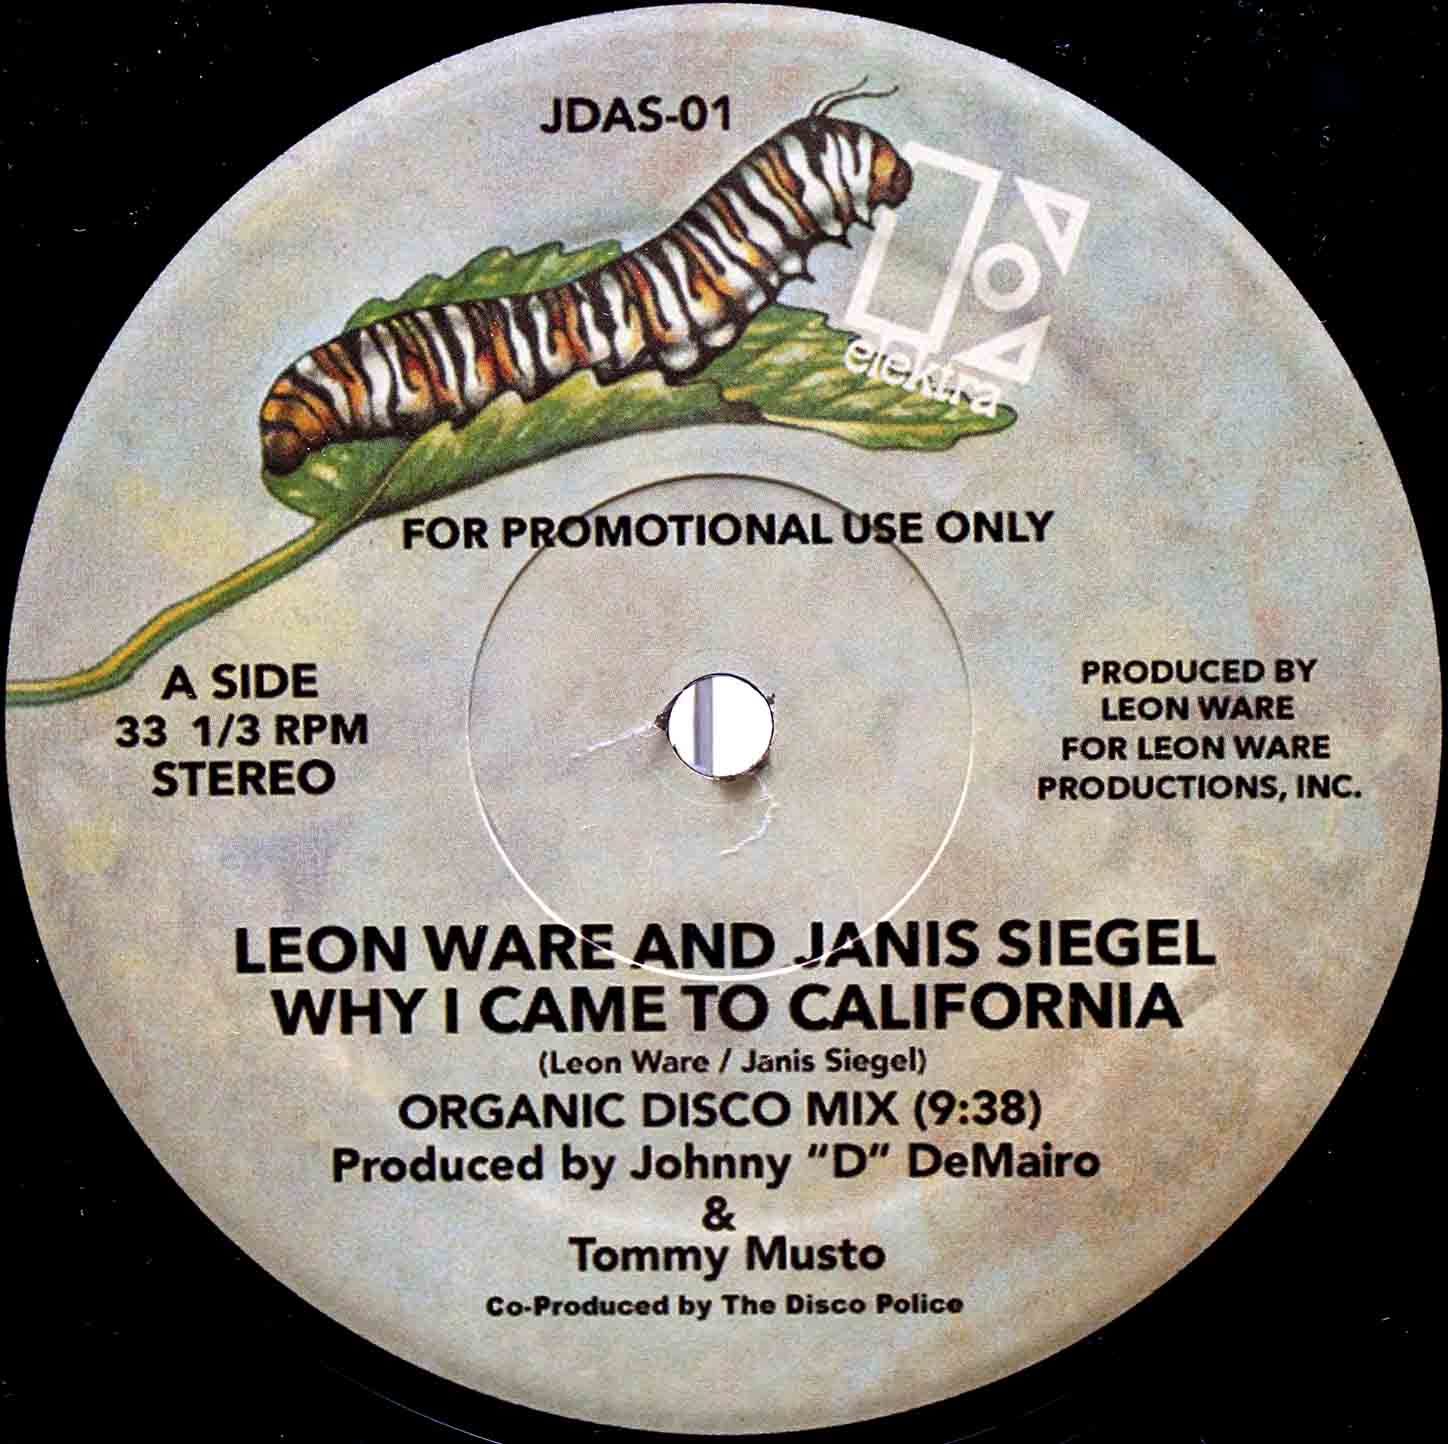 Leon Ware And Janis Siegel Why I Came To California (Organic Disco Mix) 03